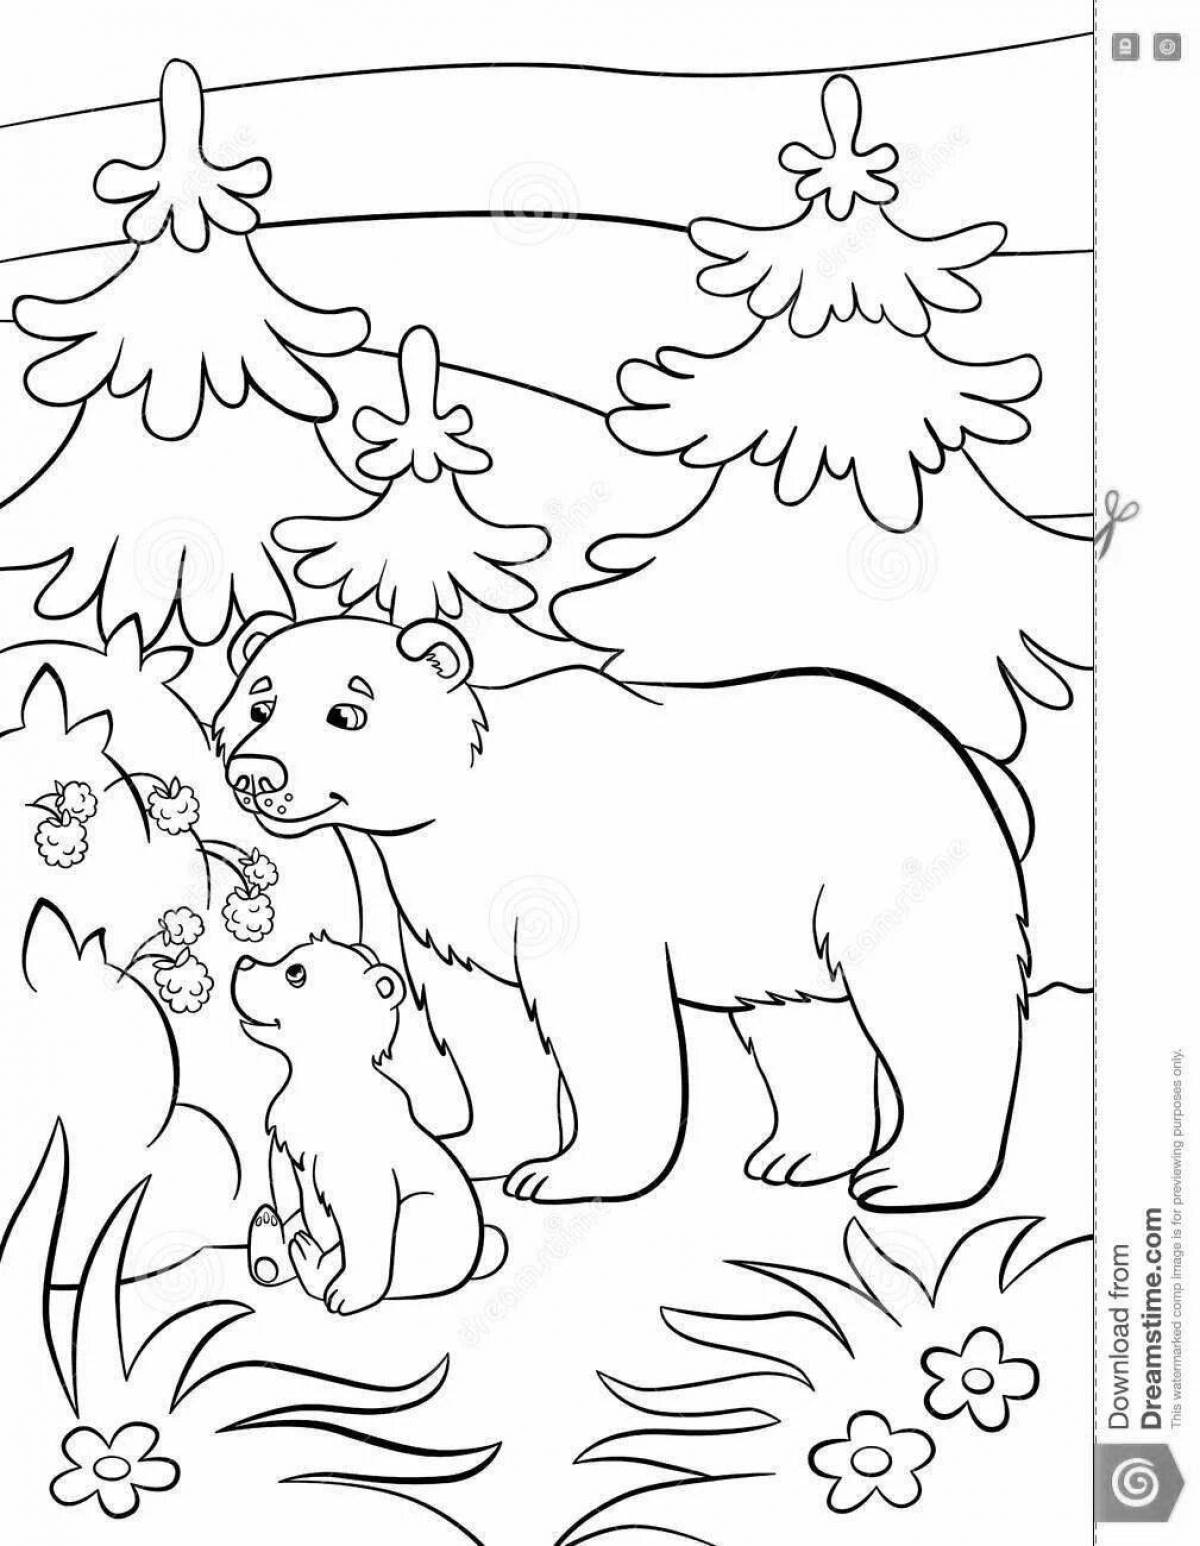 Cunning bear coloring page